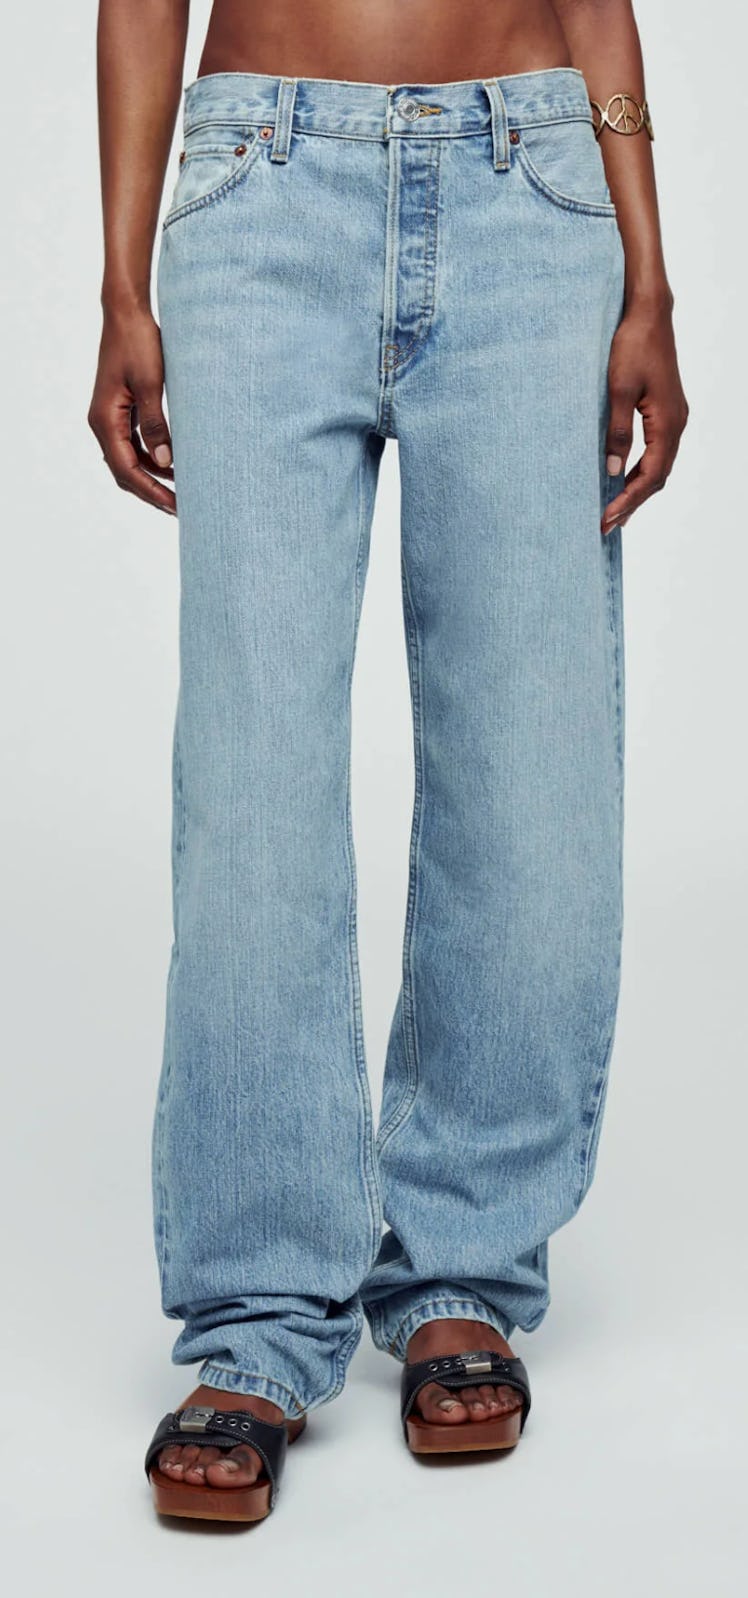 light-wash low-waisted jeans